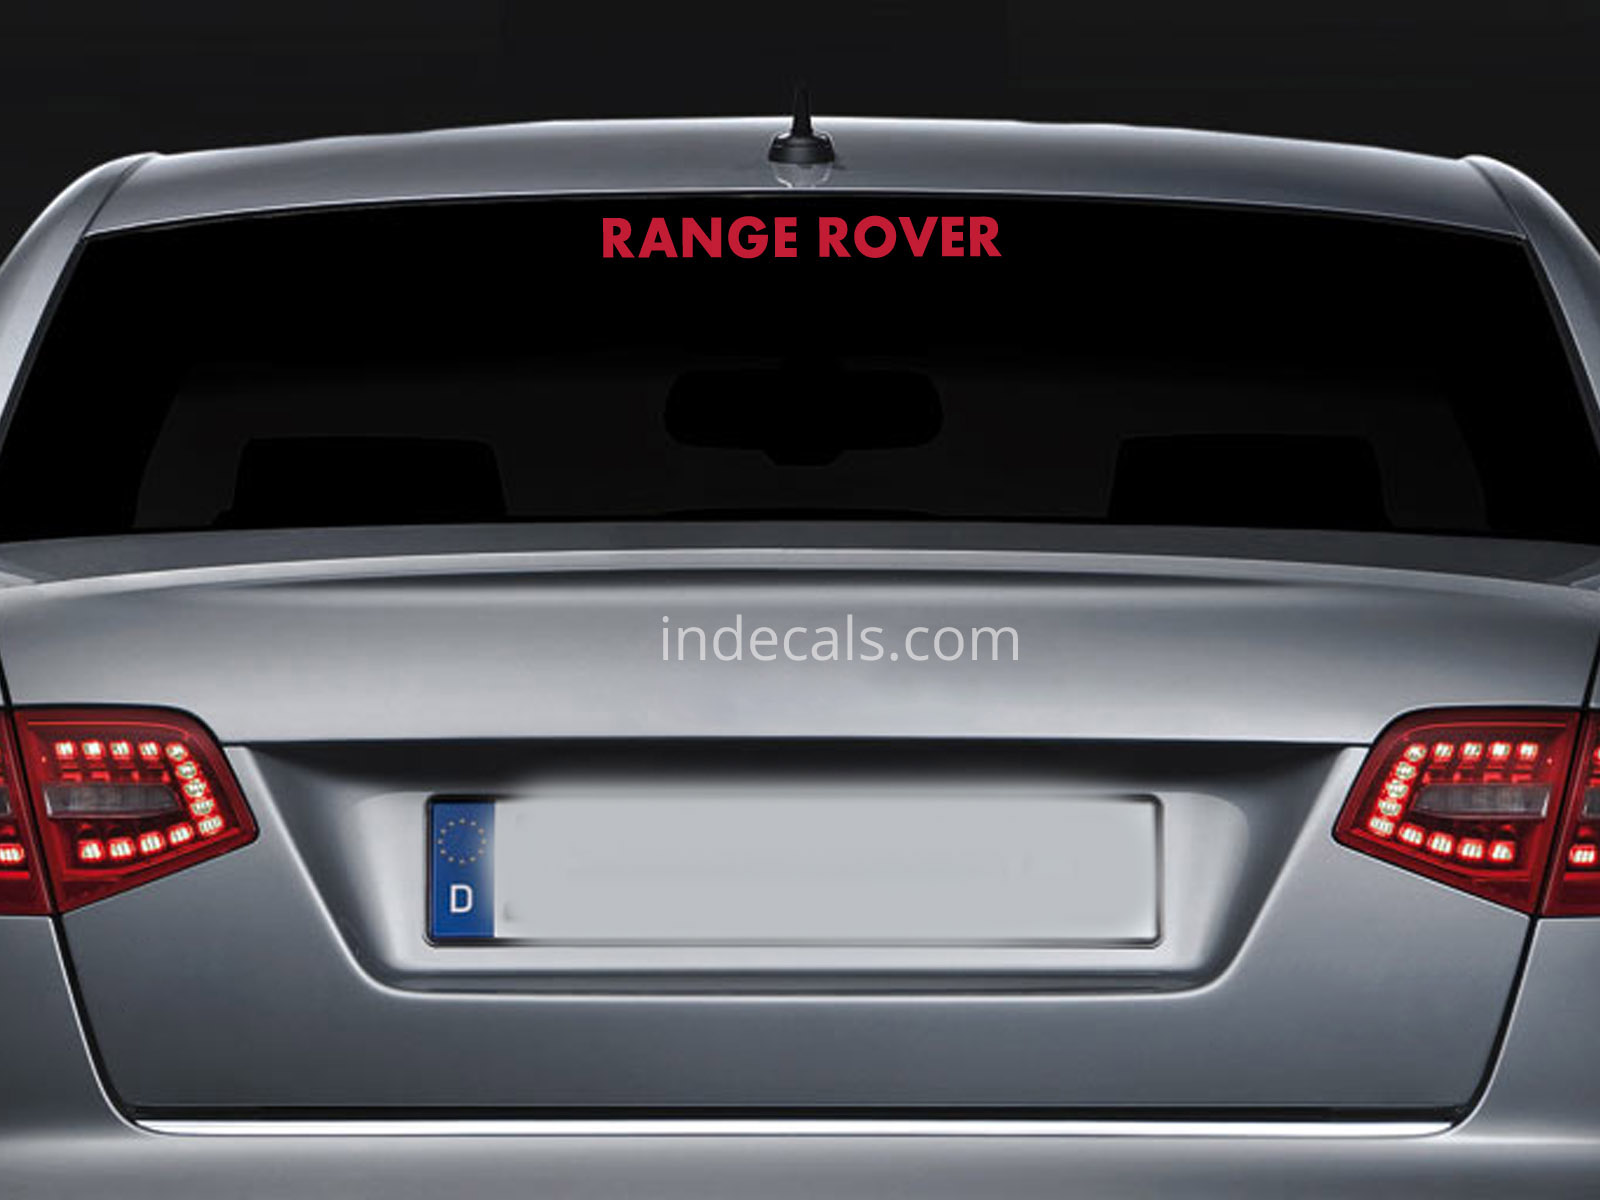 1 x Range Rover Sticker for Windshield or Back Window - Red